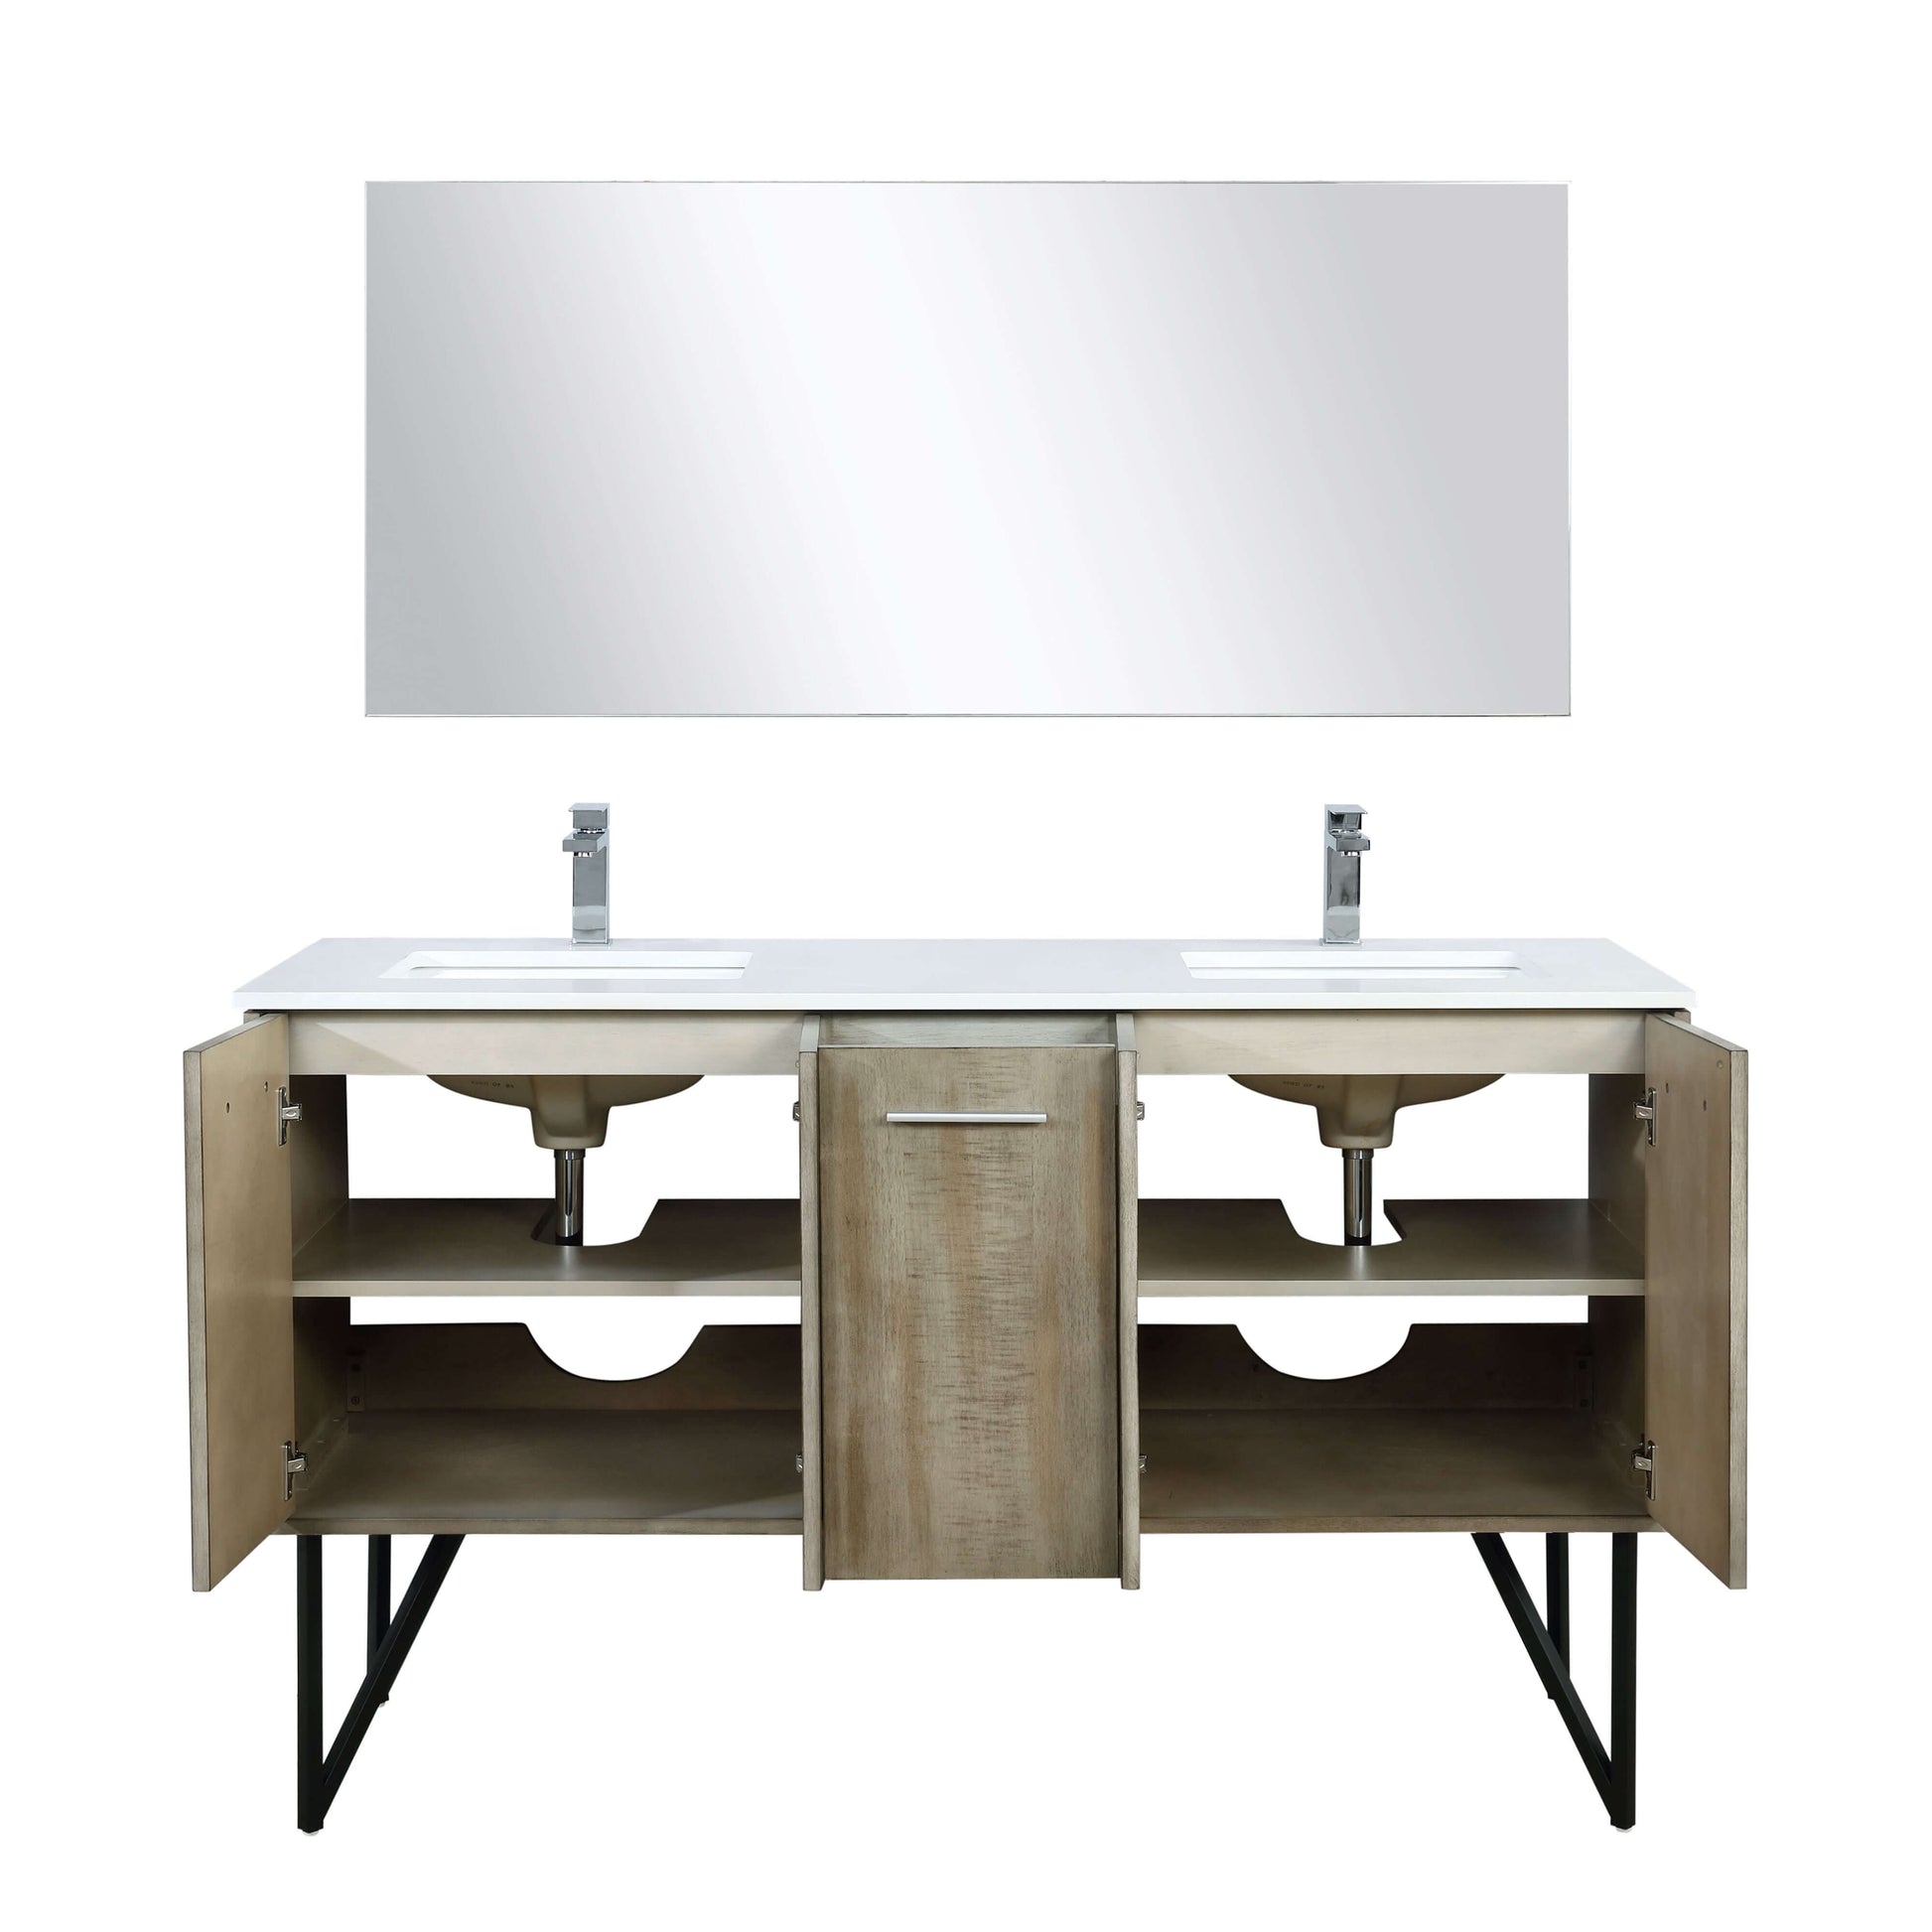 Lancy 60" Rustic Acacia Double Bathroom Vanity, White Quartz Top, White Square Sinks, Labaro Brushed Nickel Faucet Set, and 55" Frameless Mirror - LLC60DKSOSM55FCH